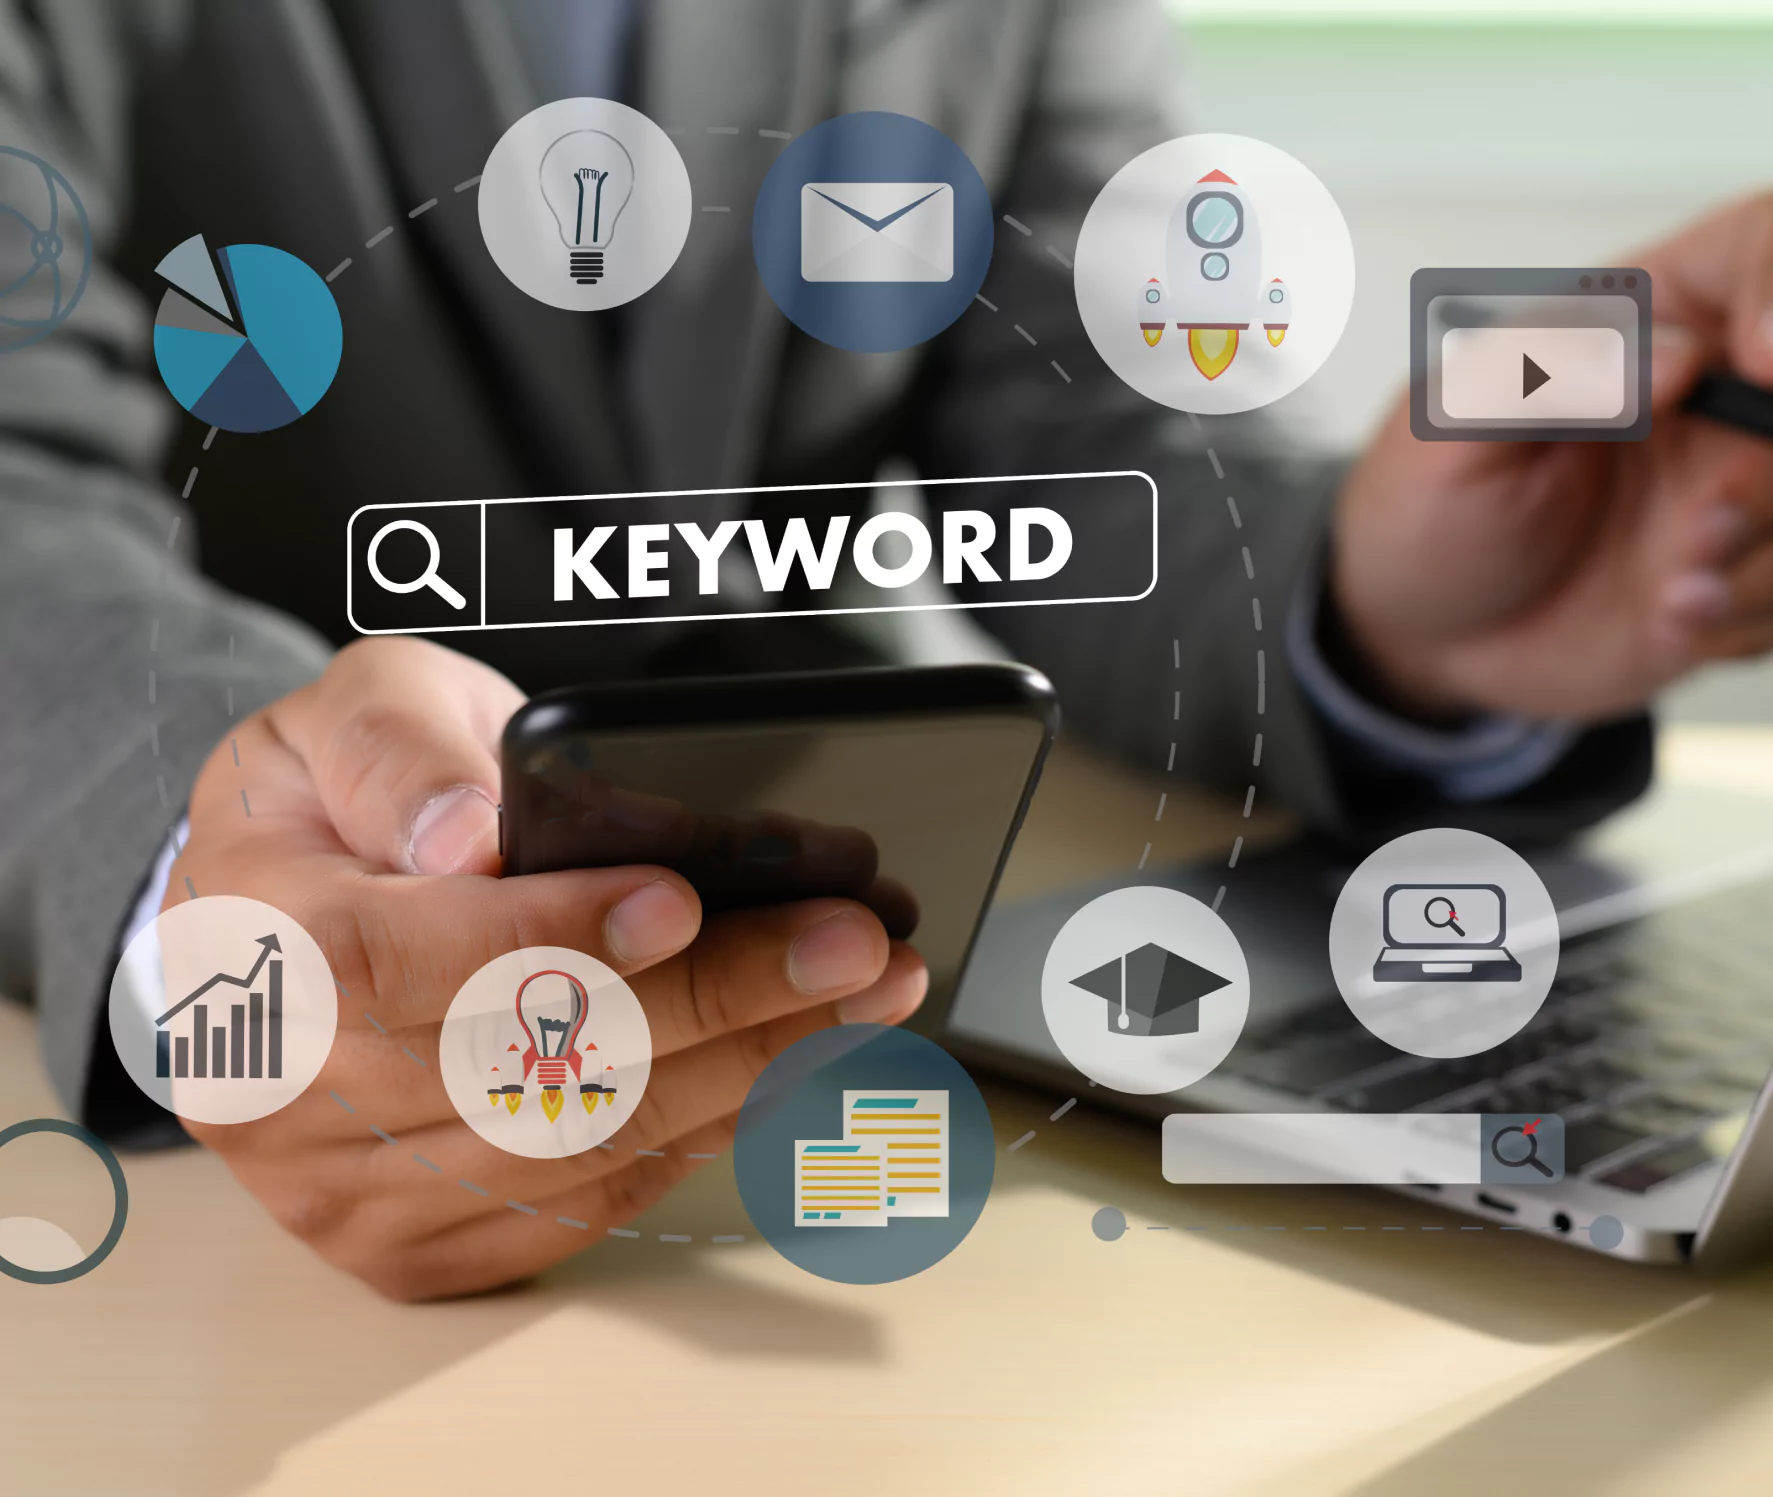  Keyword ranking and Technical SEO profficiency
                            